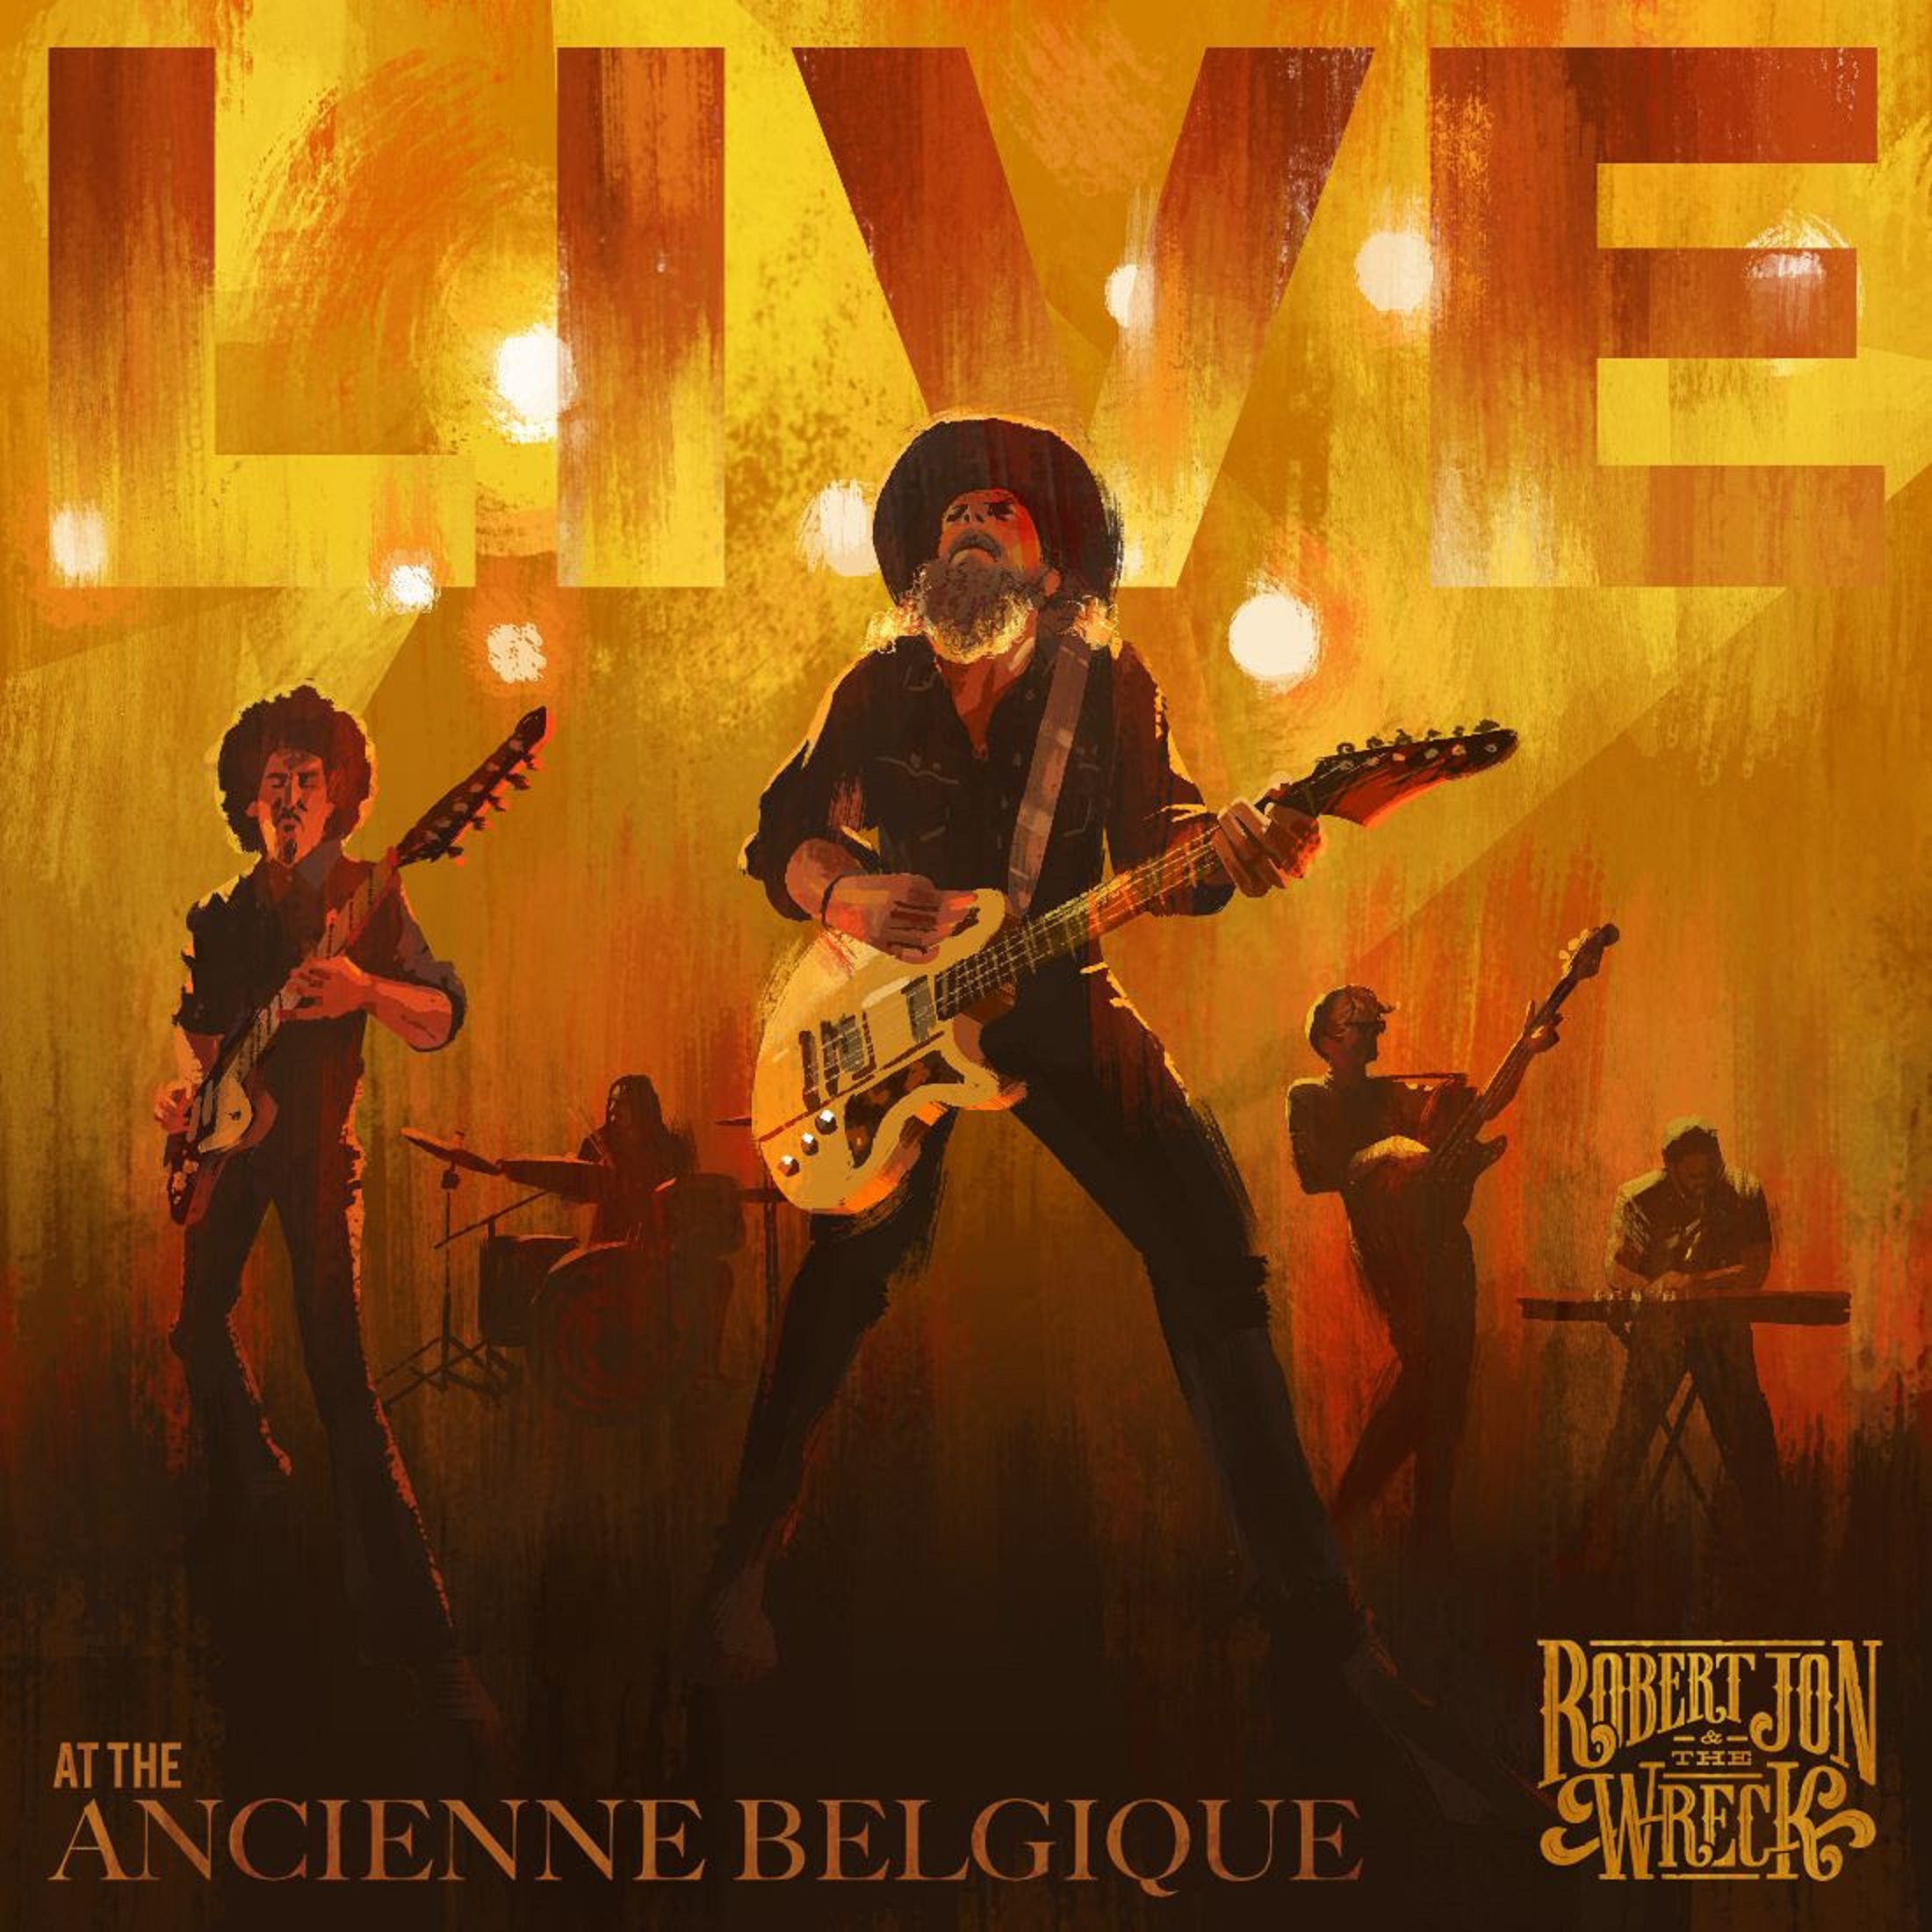 Robert Jon & The Wreck Announce First Live DVD, Live At The Ancienne Belgique